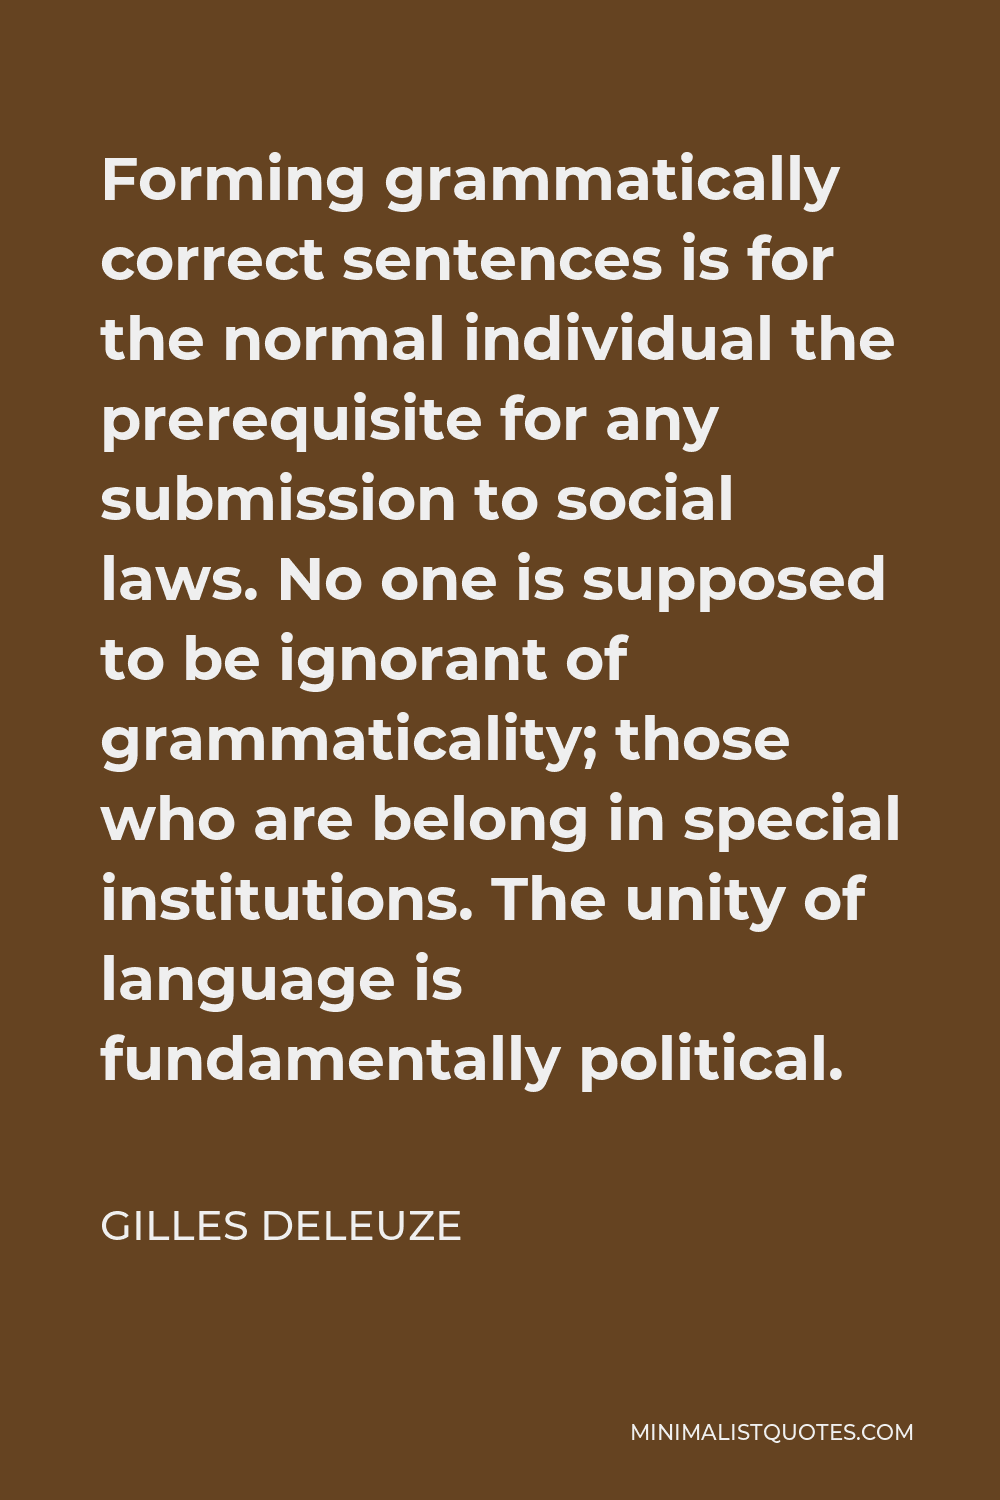 gilles-deleuze-quote-forming-grammatically-correct-sentences-is-for